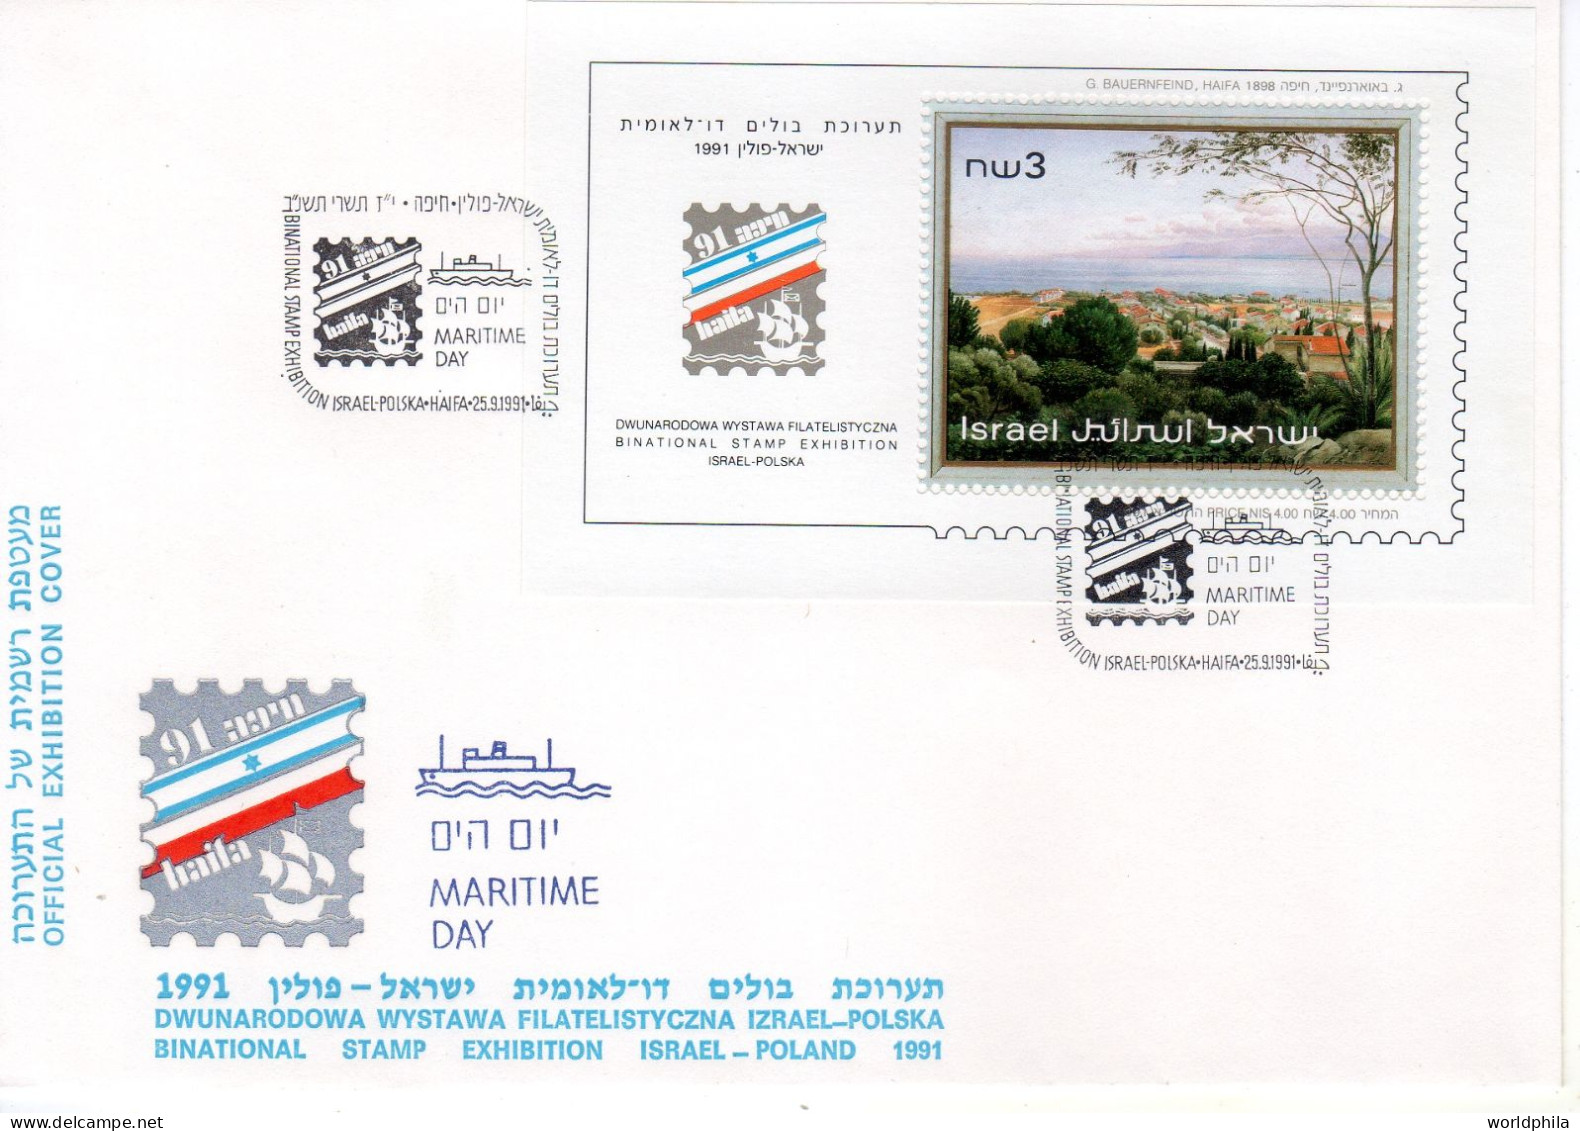 ISRAEL-Poland "Haifa 91" BiNational Stamp Exhibition Cacheted Cover "German Colony" Painting Souvenir Sheet - Covers & Documents